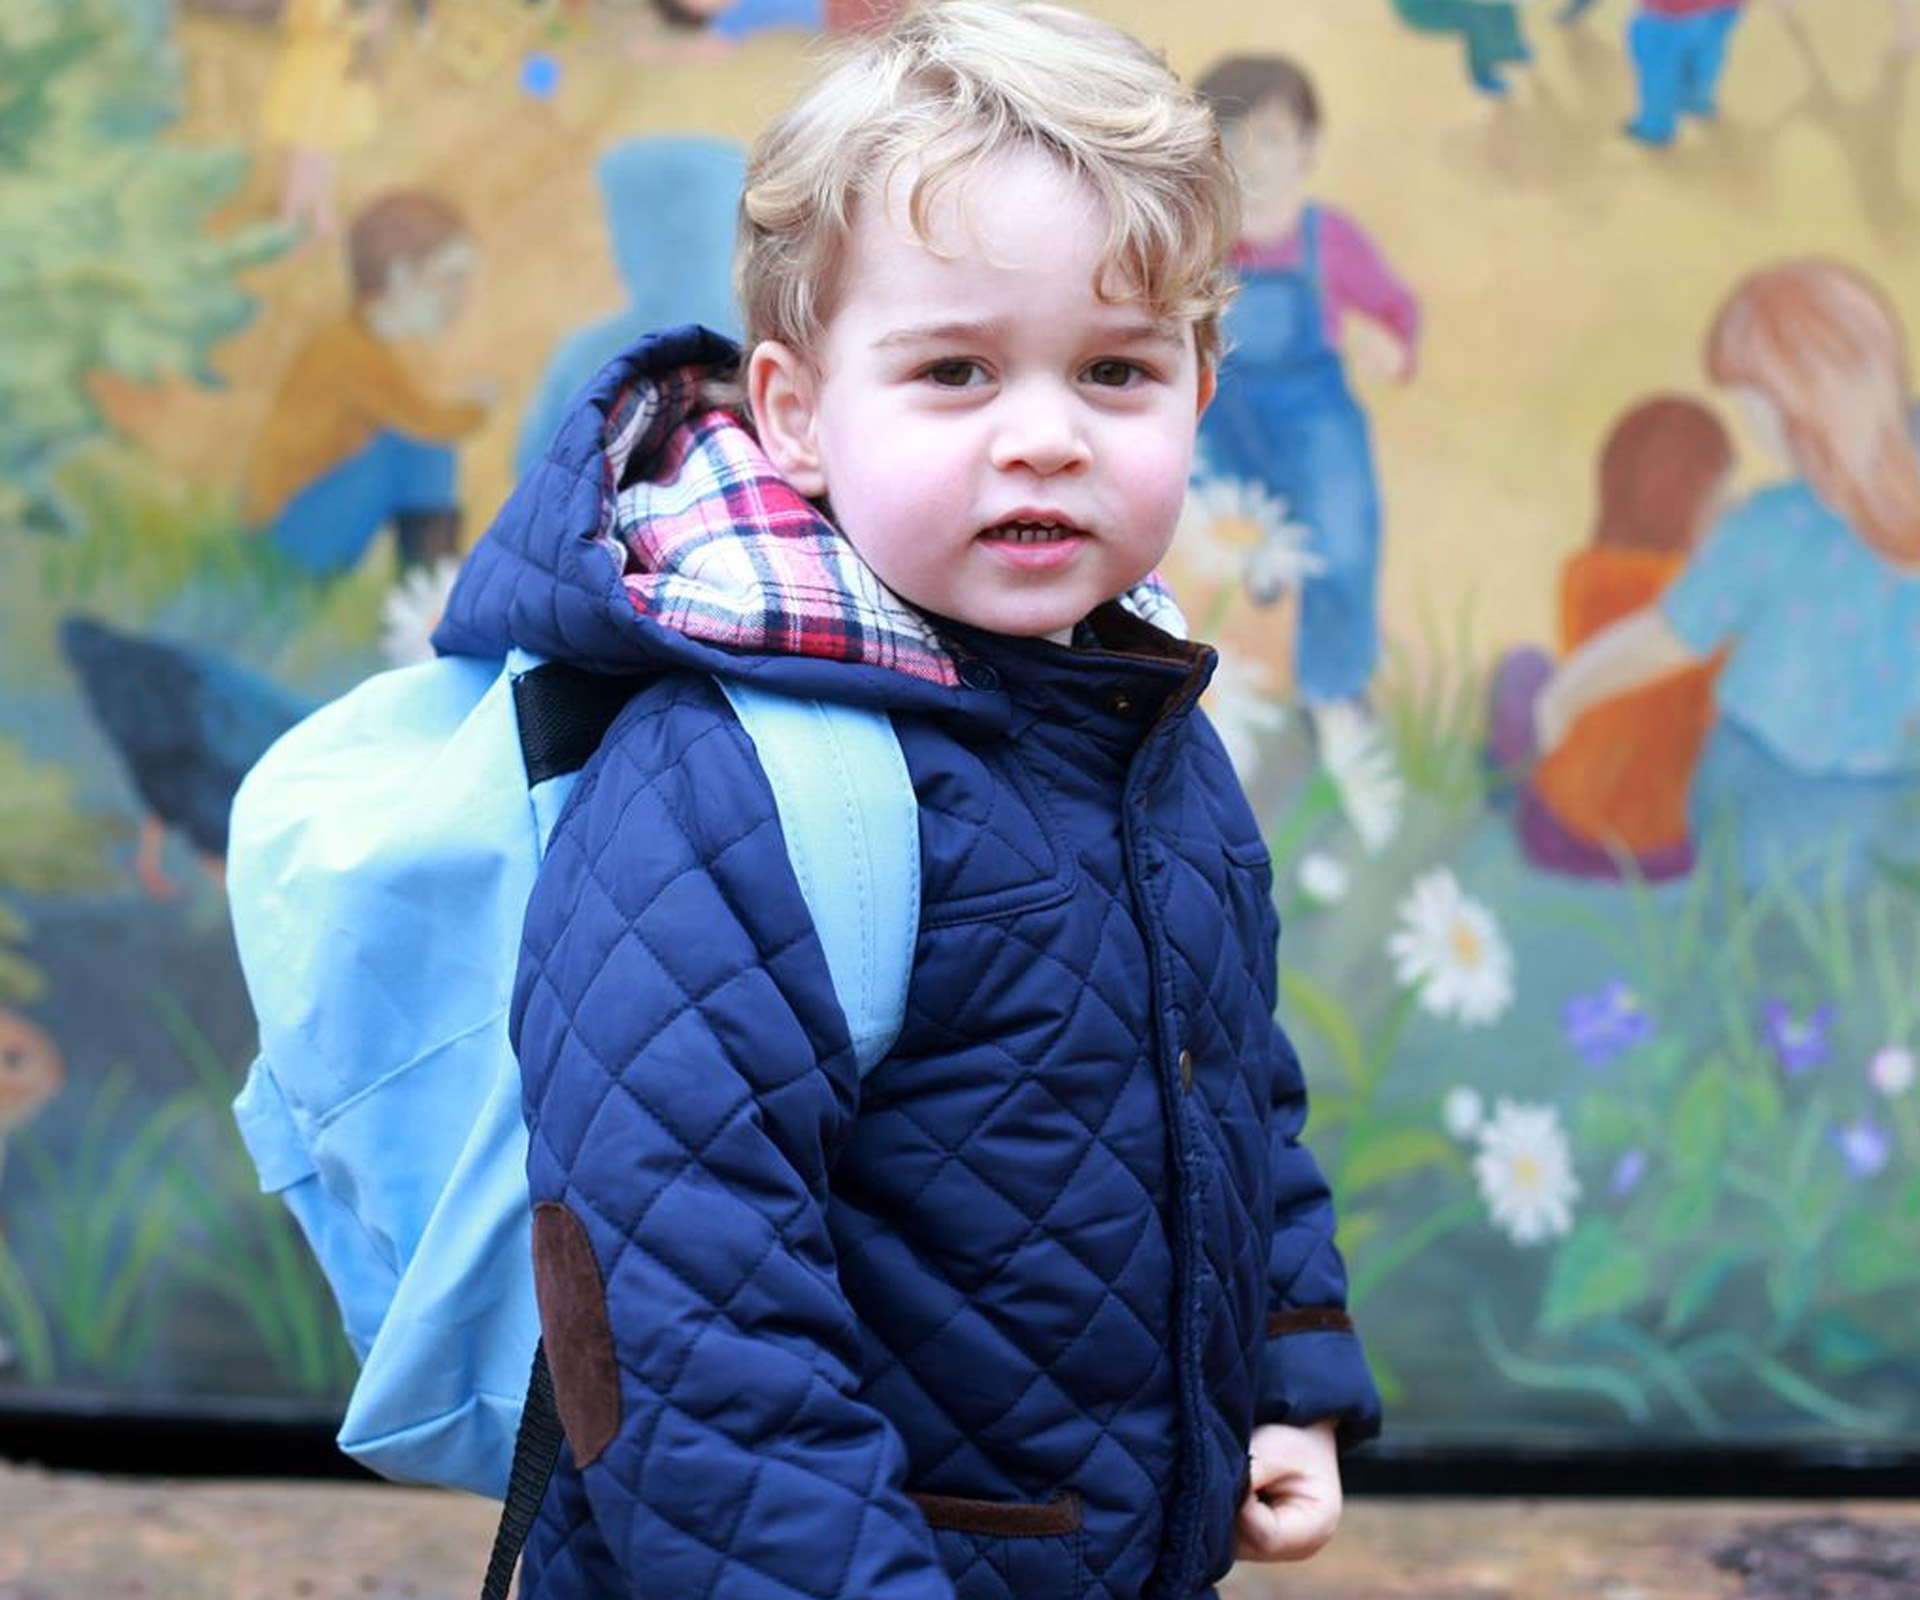 Prince George will attend primary school in September.